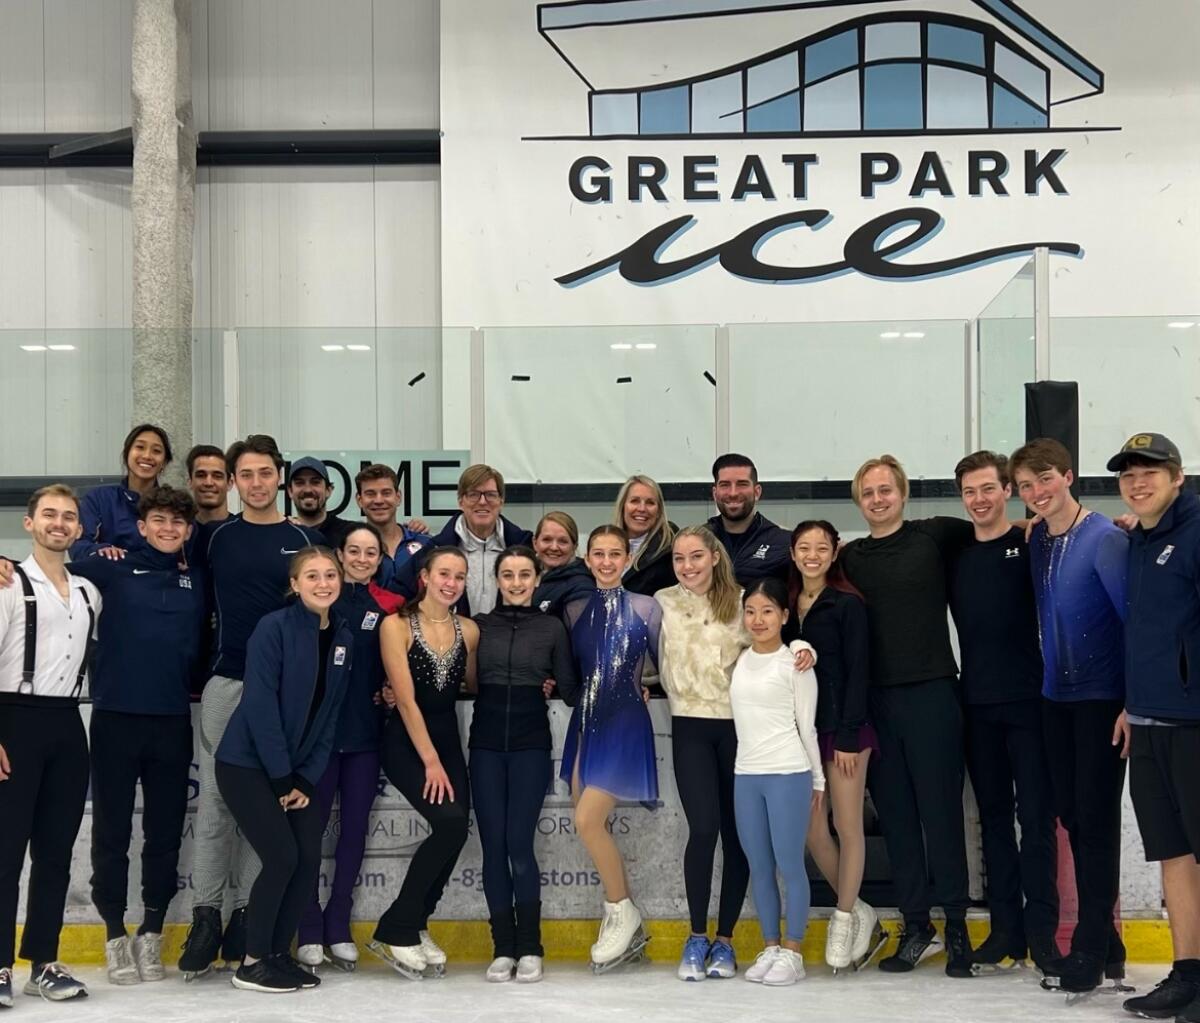 Todd Sand and Jenni Meno pose for a photo with many of the figure skaters who train at Great Park Ice.